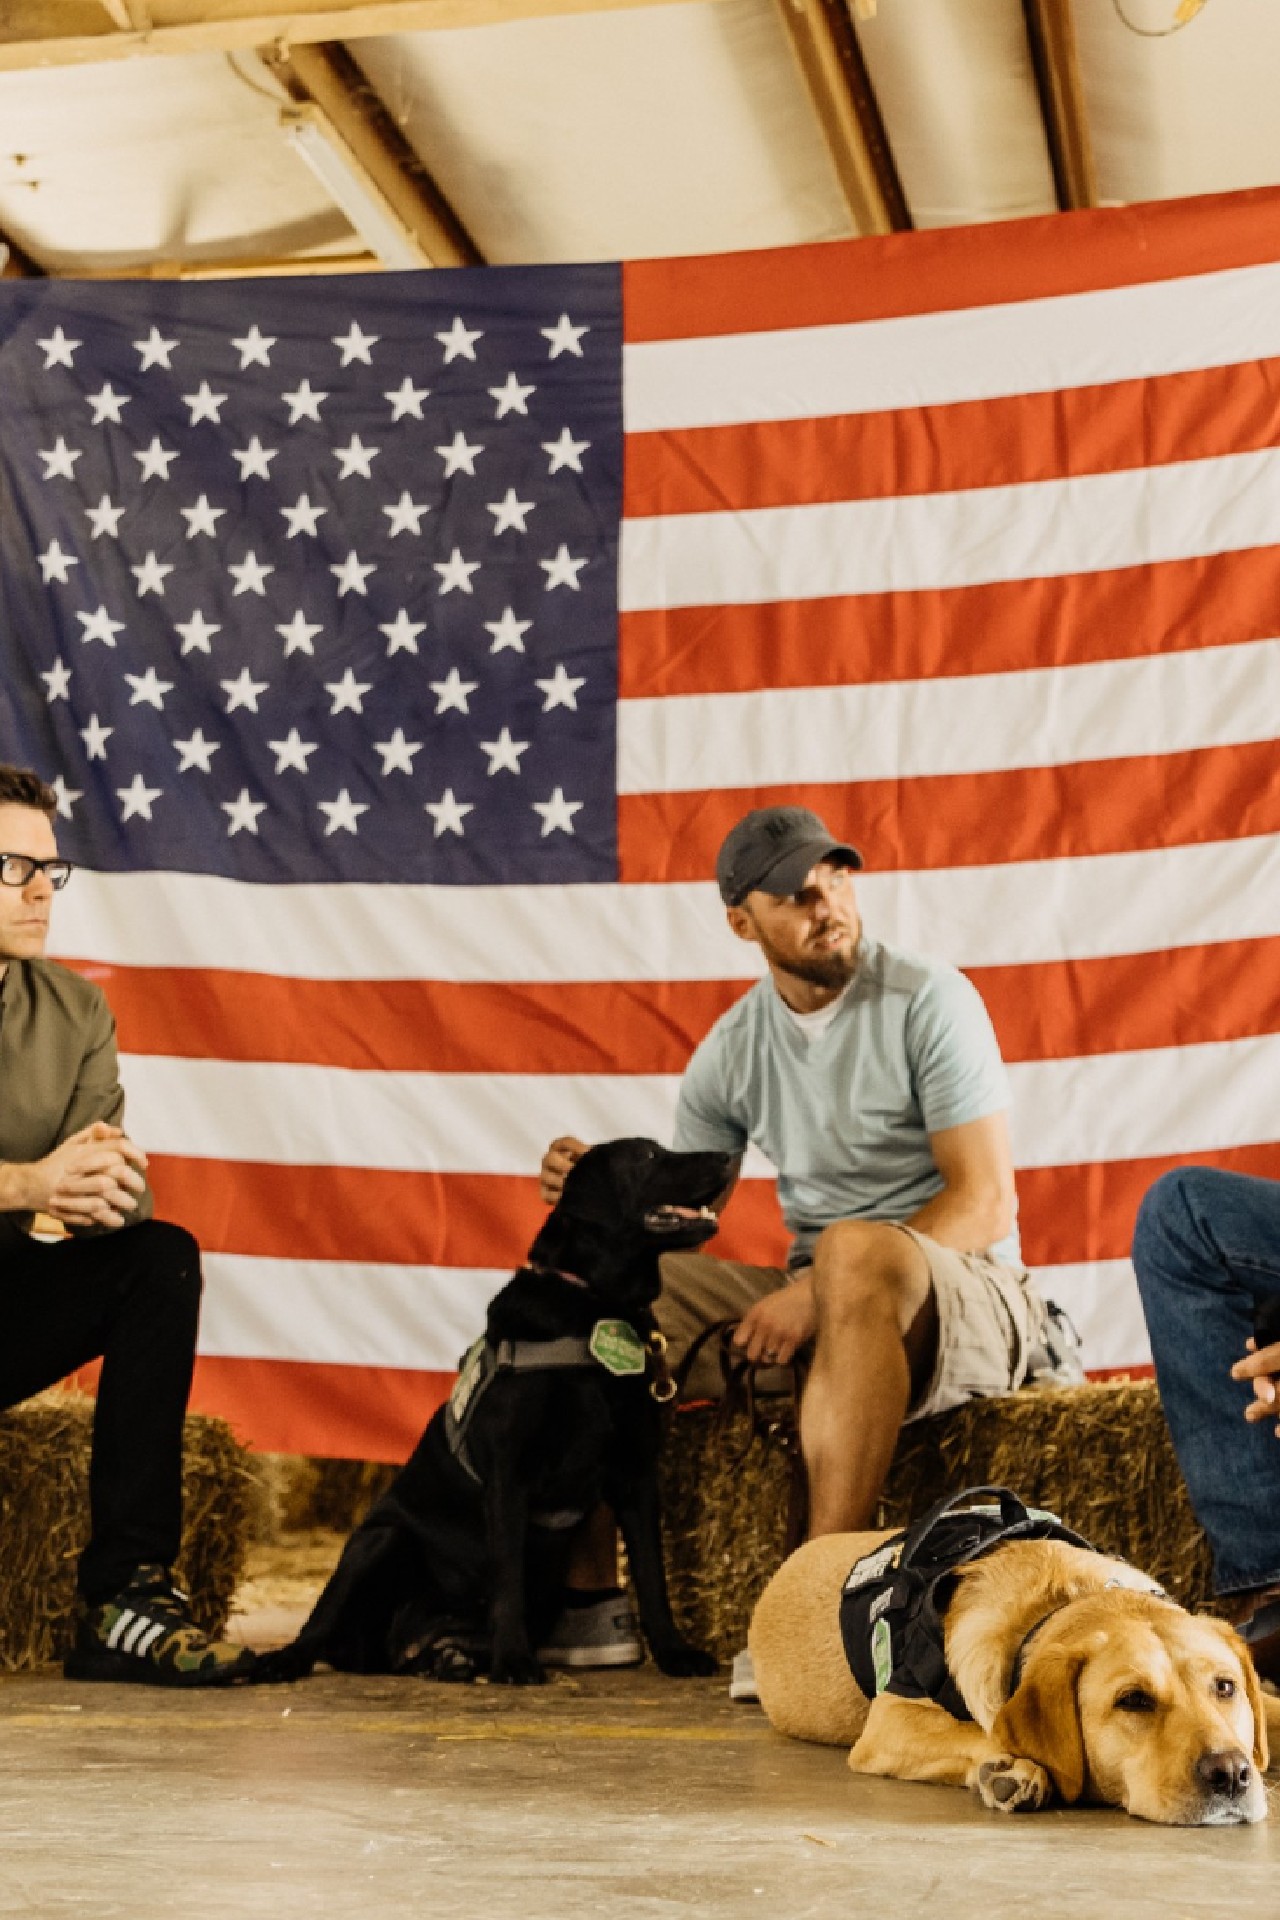 Dog Chow partner and TV/radio personality Bobby Bones with veterans Andy and Shannon for the fourth annual Dog Chow Service Dog Salute campaign